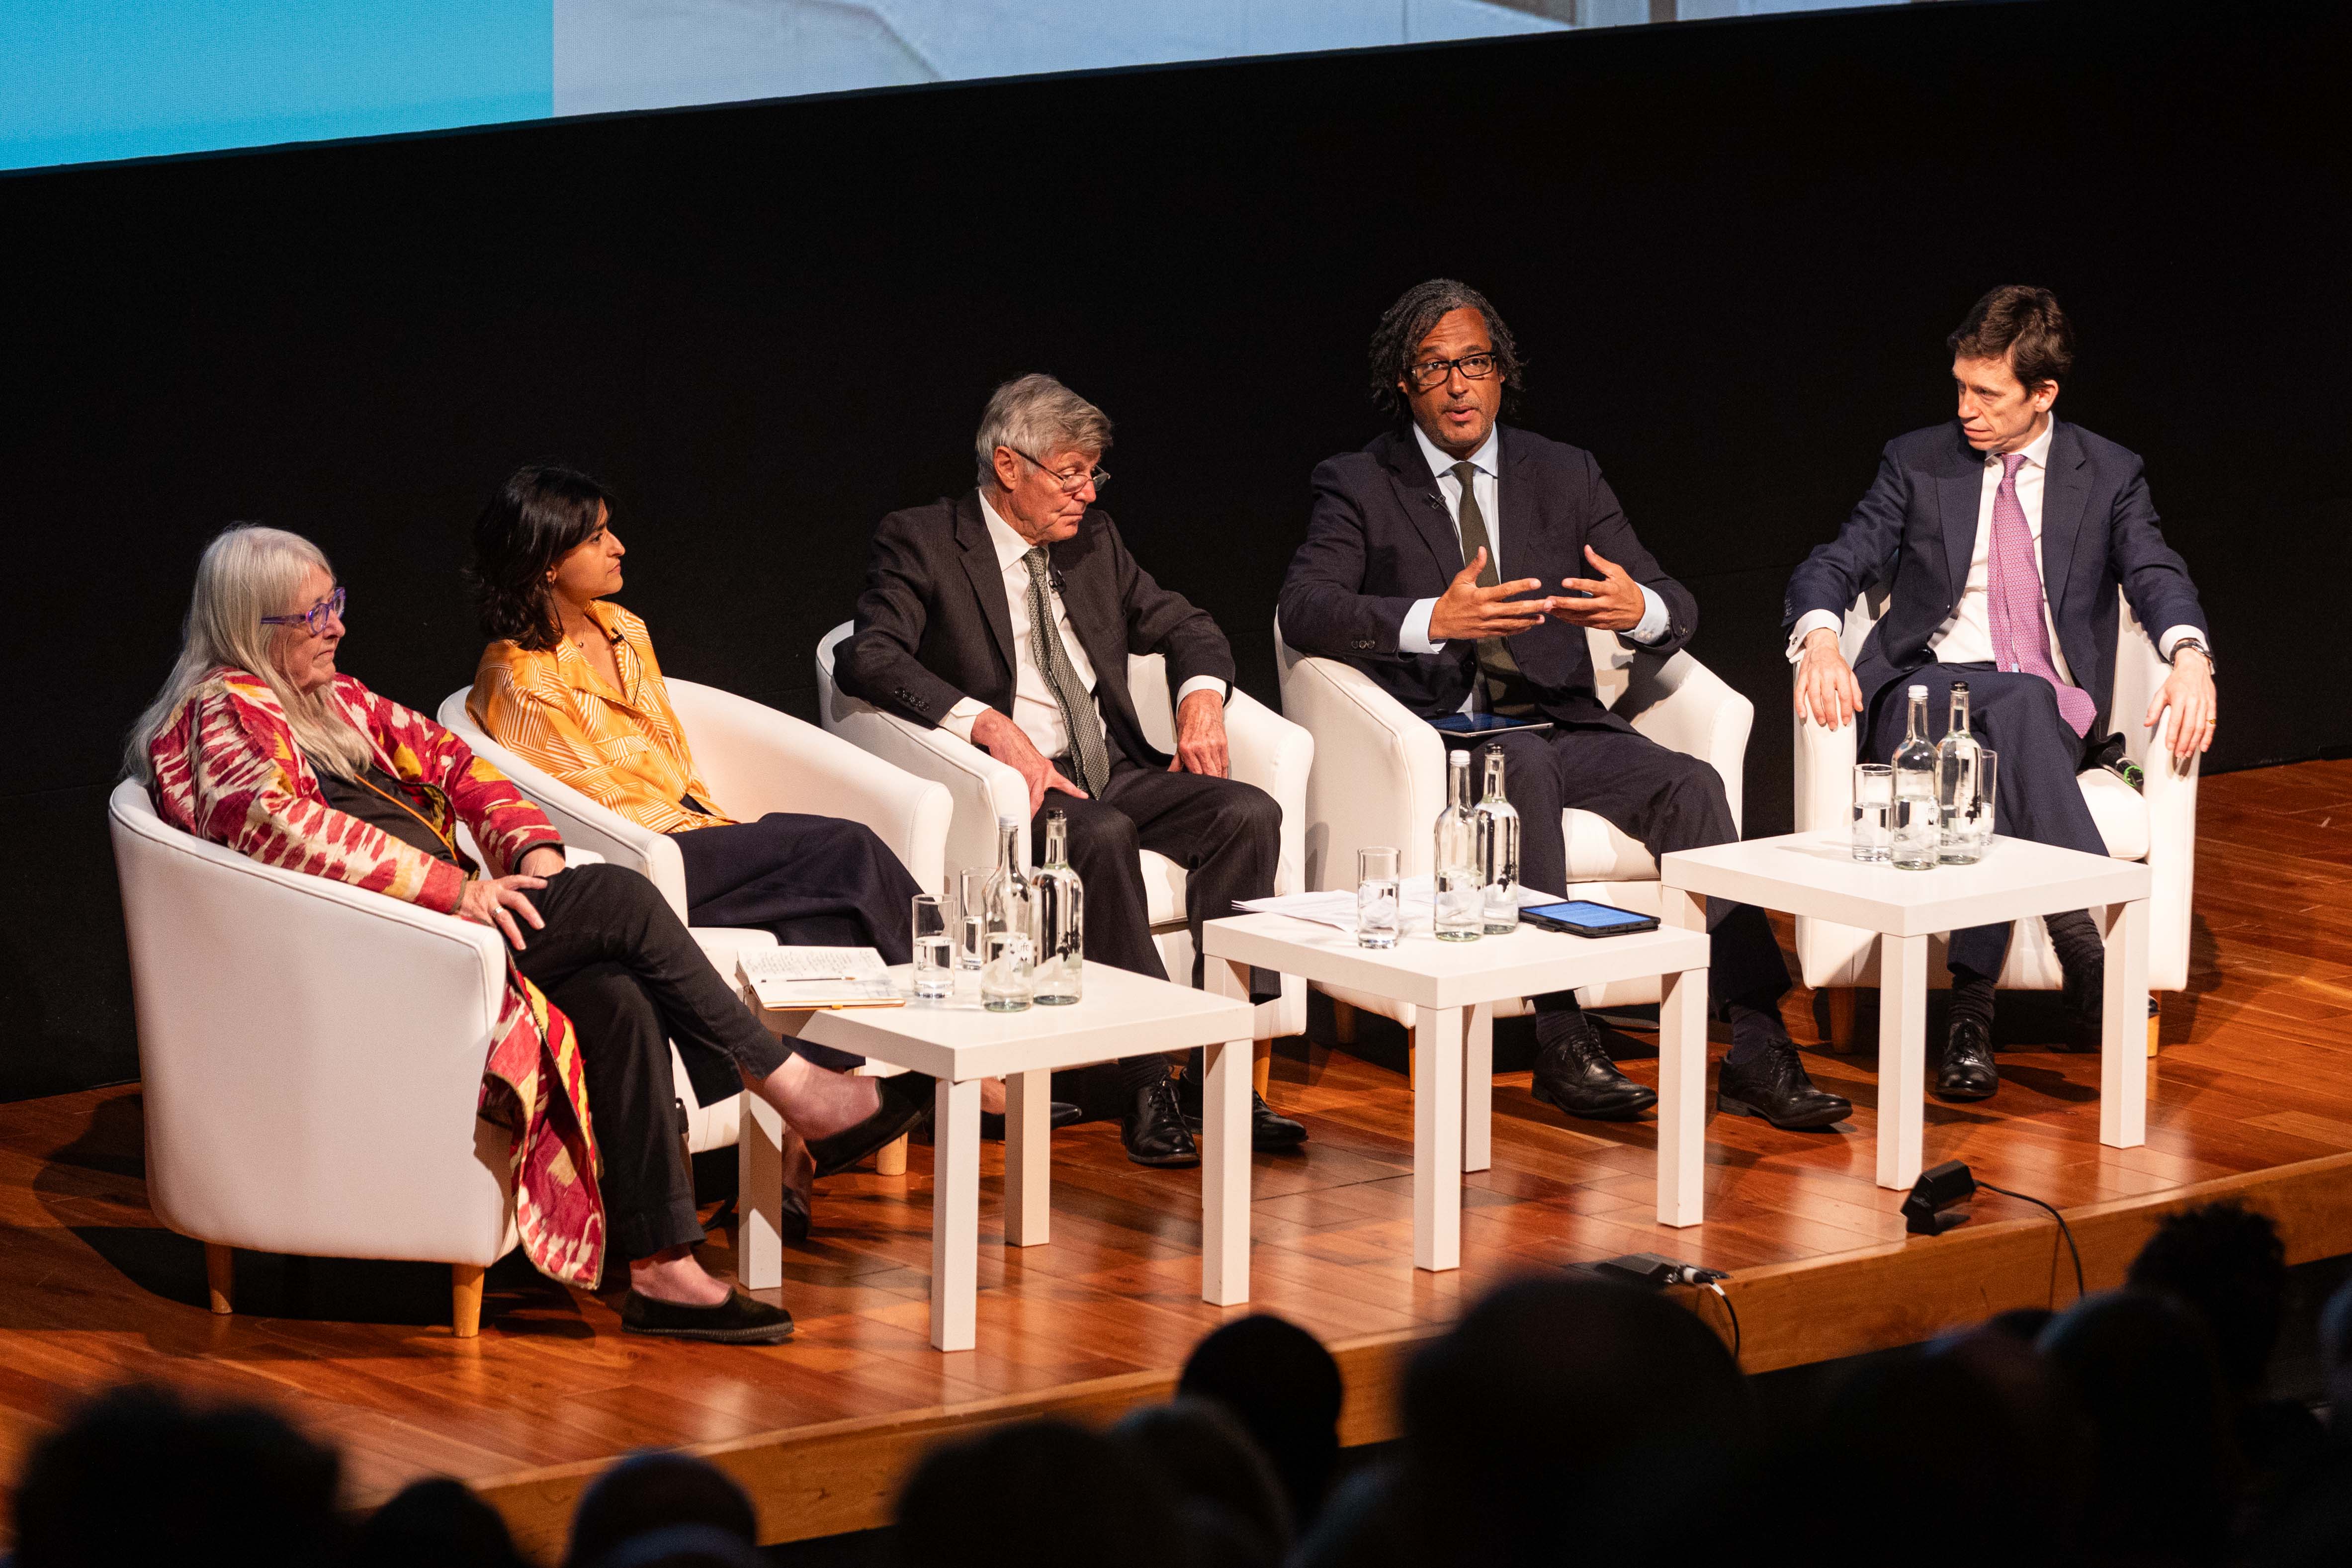 The panel, including Beard, Munira Mirza, David Olusoga and Rory Stewart, discussed the question “Who owns the past?” It was hosted by Matthew Parris, centre